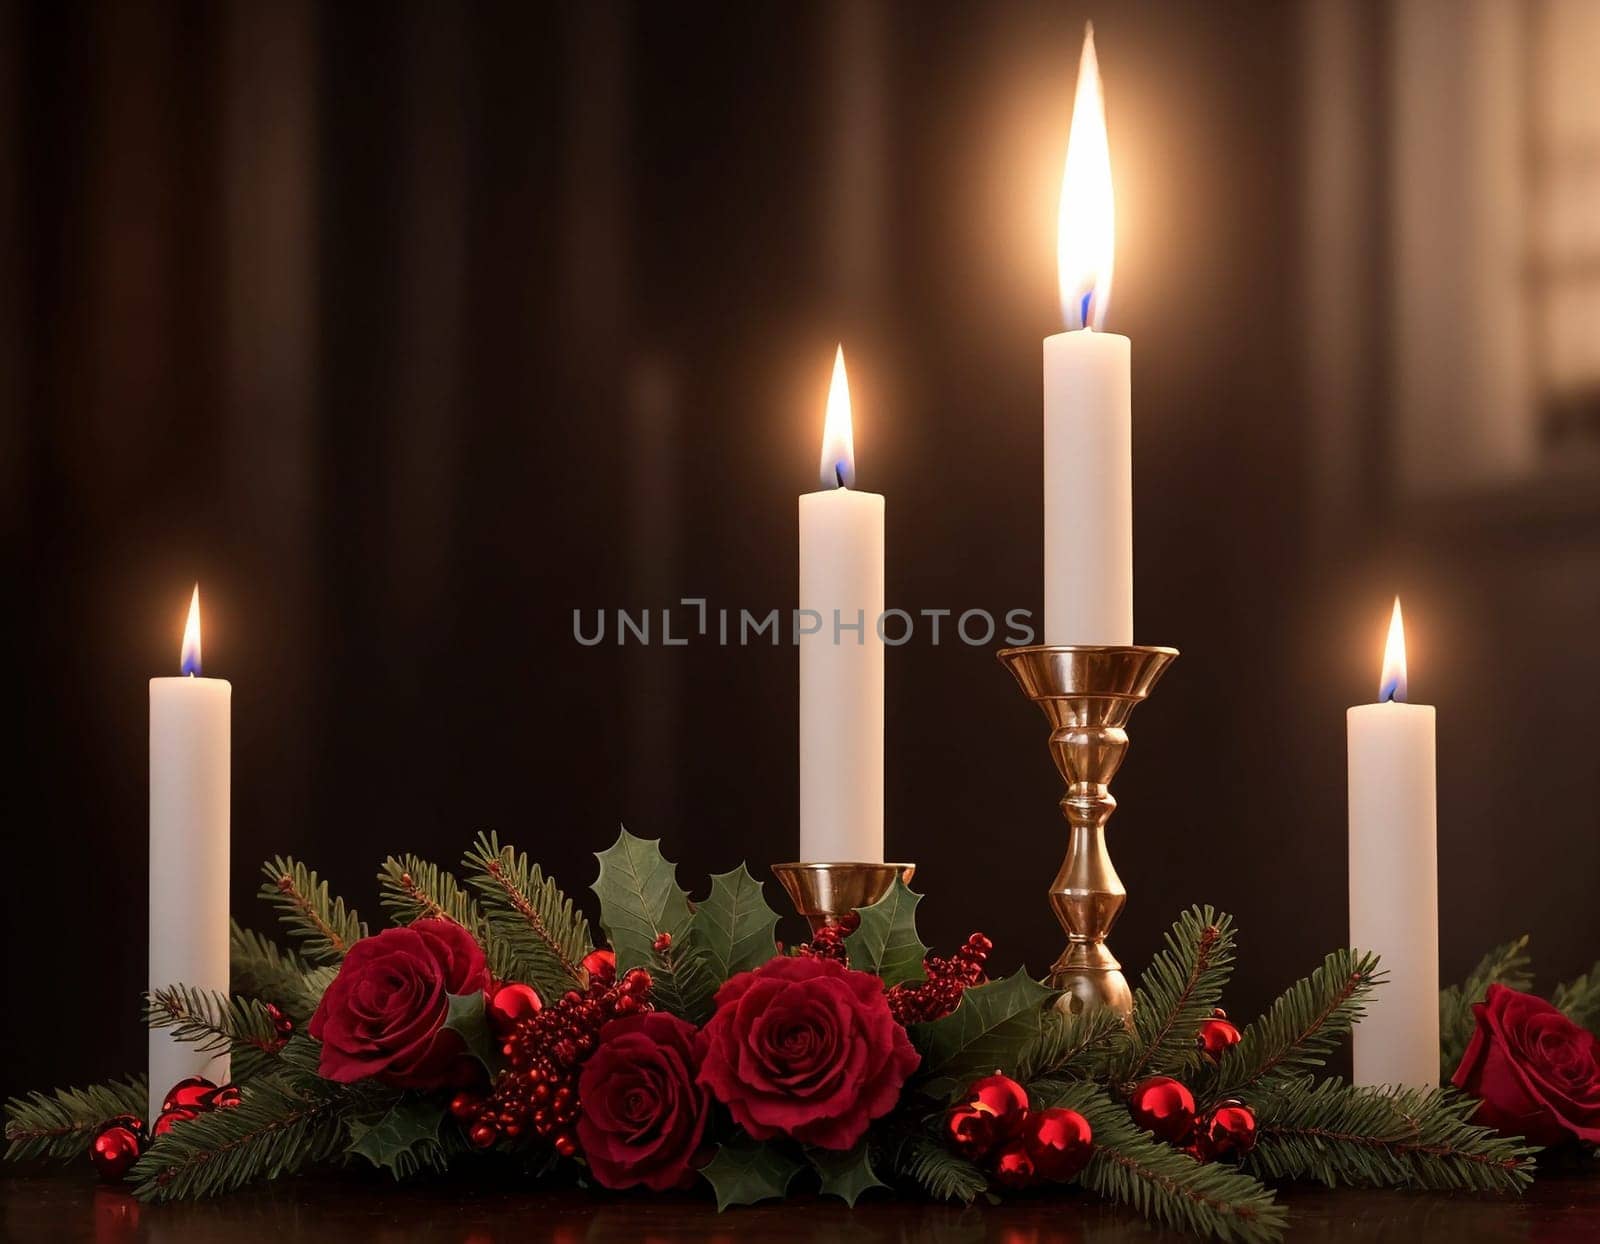 Candle and flowers. High quality illustration